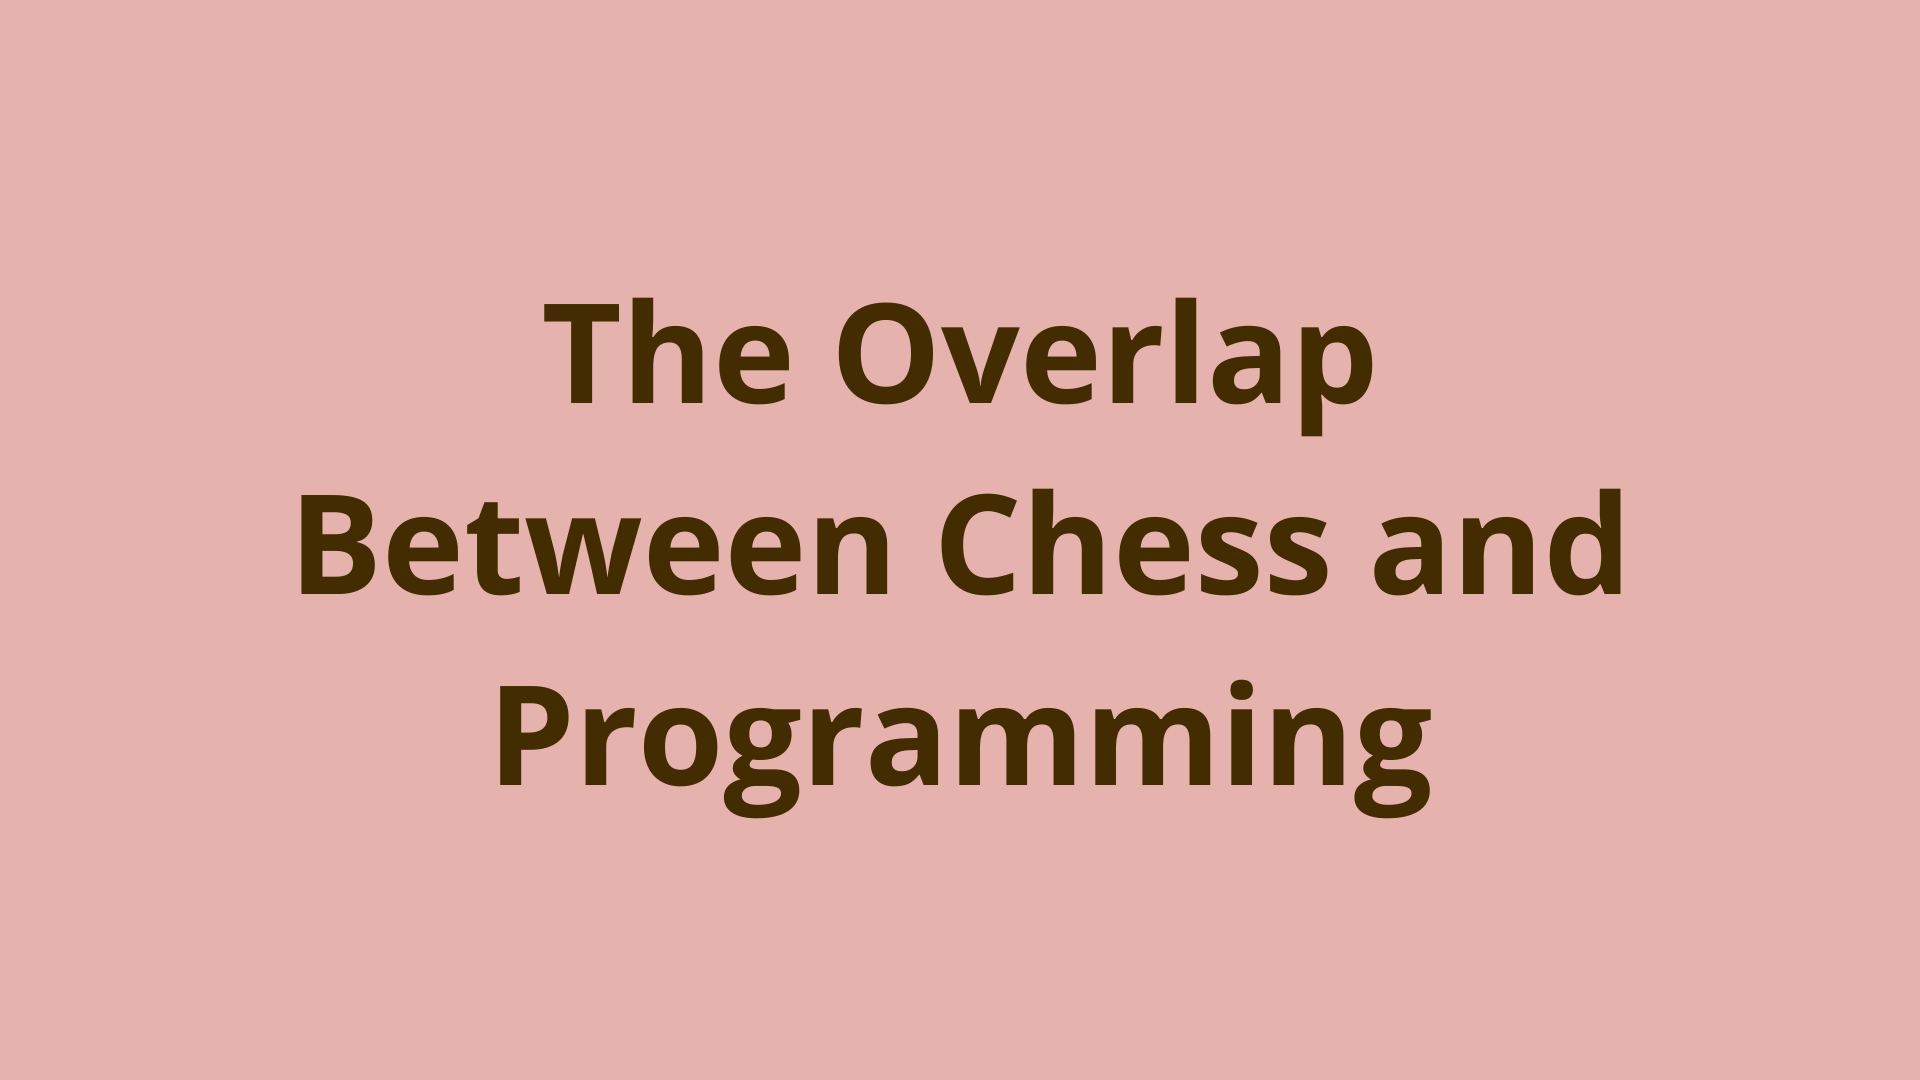 Image of The overlap between chess and programming is real